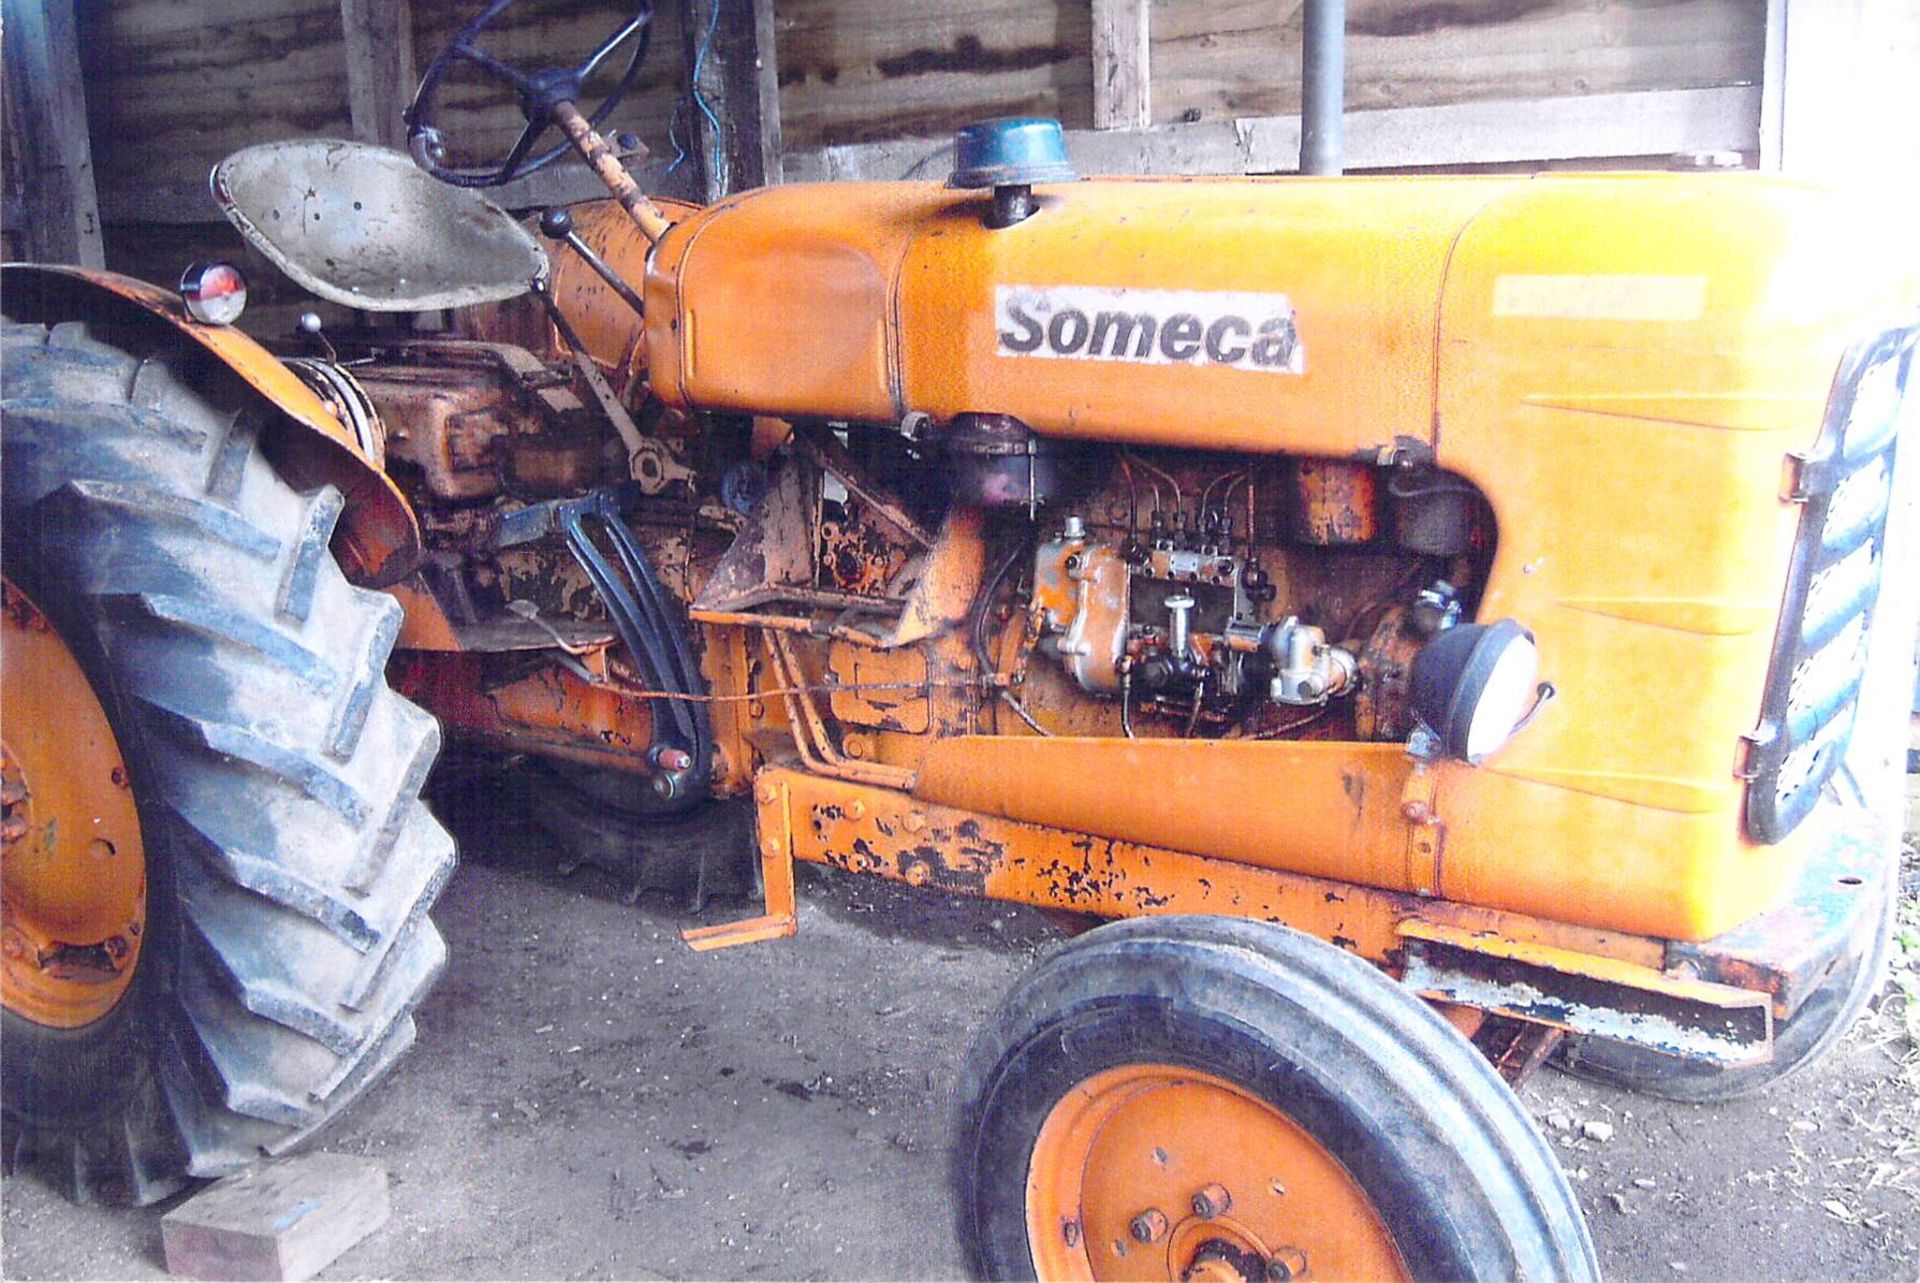 1960s SOMECA 40 4cylinder diesel TRACTOR Serial No: 67886 Fitted with 16.9x28 rear and 6.00x19 front